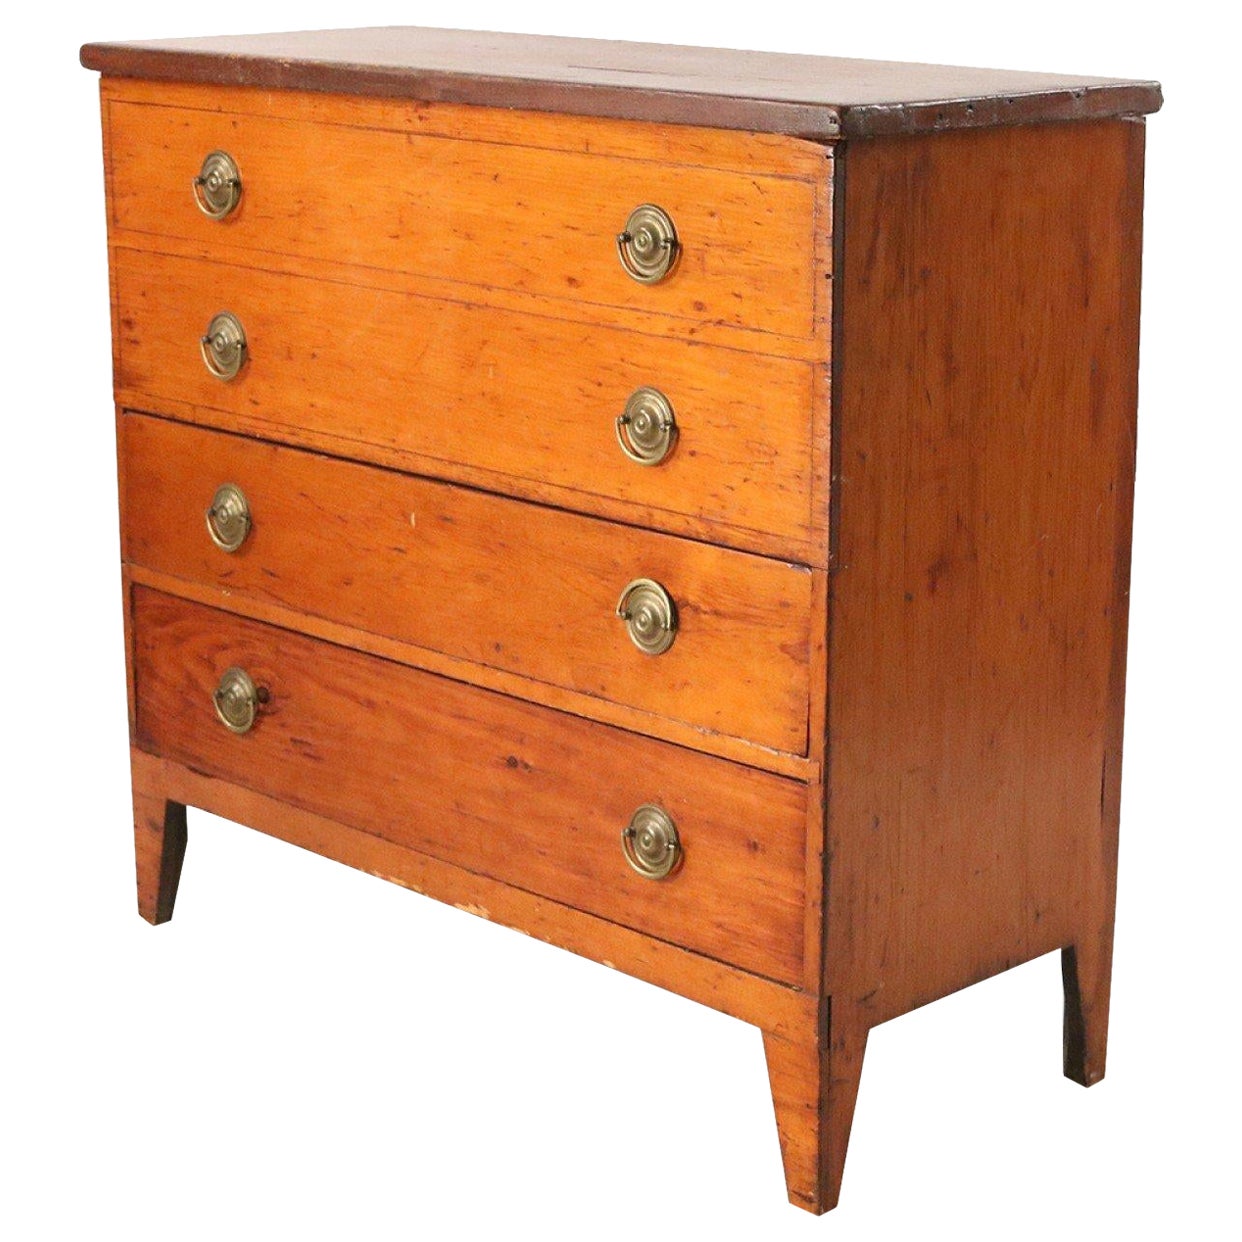 American Country Mid-Century Four Drawer Chest of Drawers